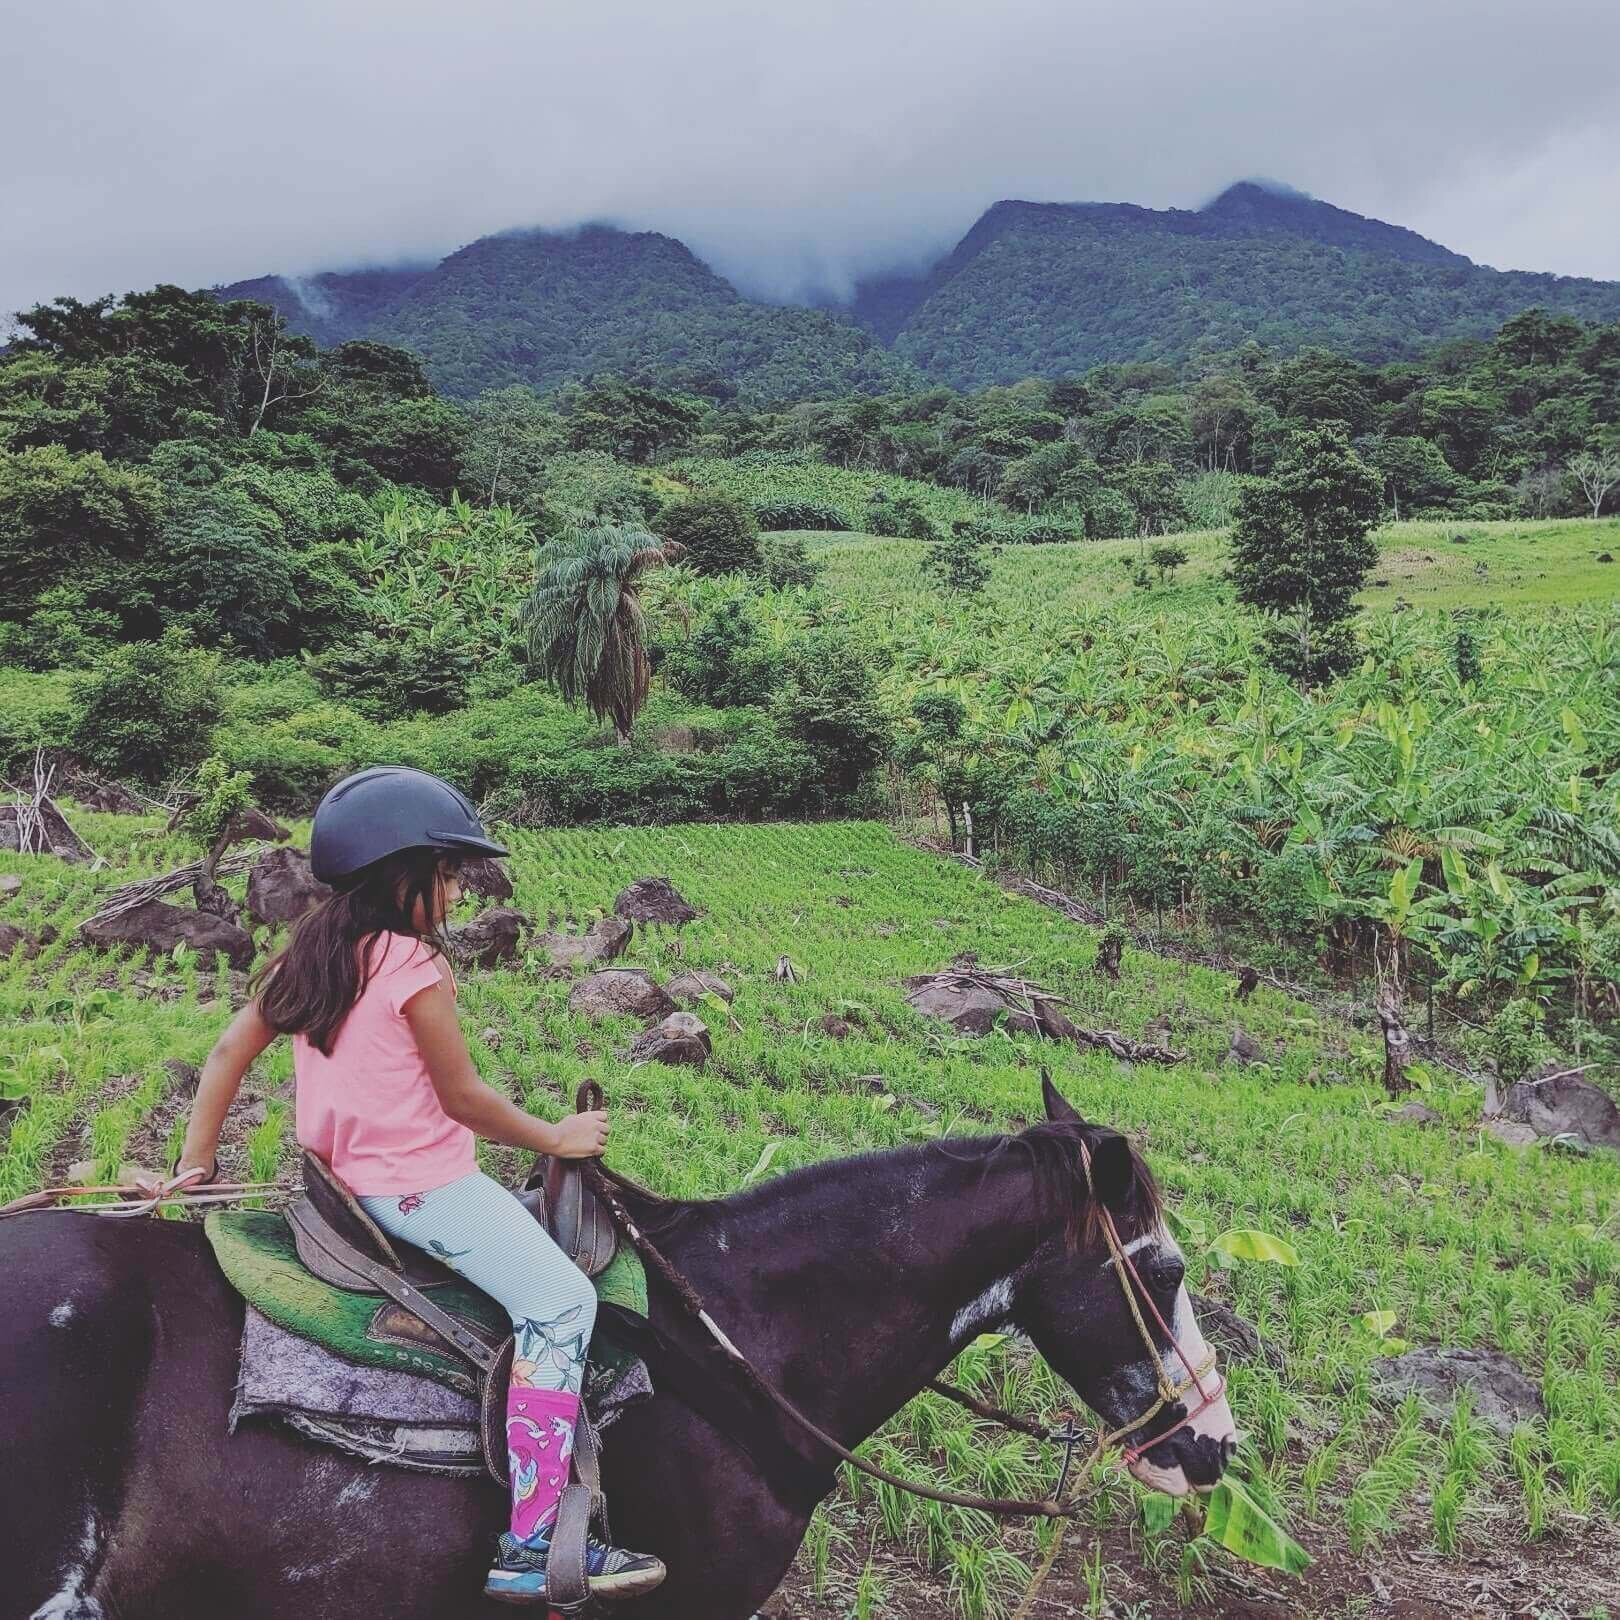 Family Fun on Ometepe Island Horesriding for all ages and abilities Hari's Horses.jpg